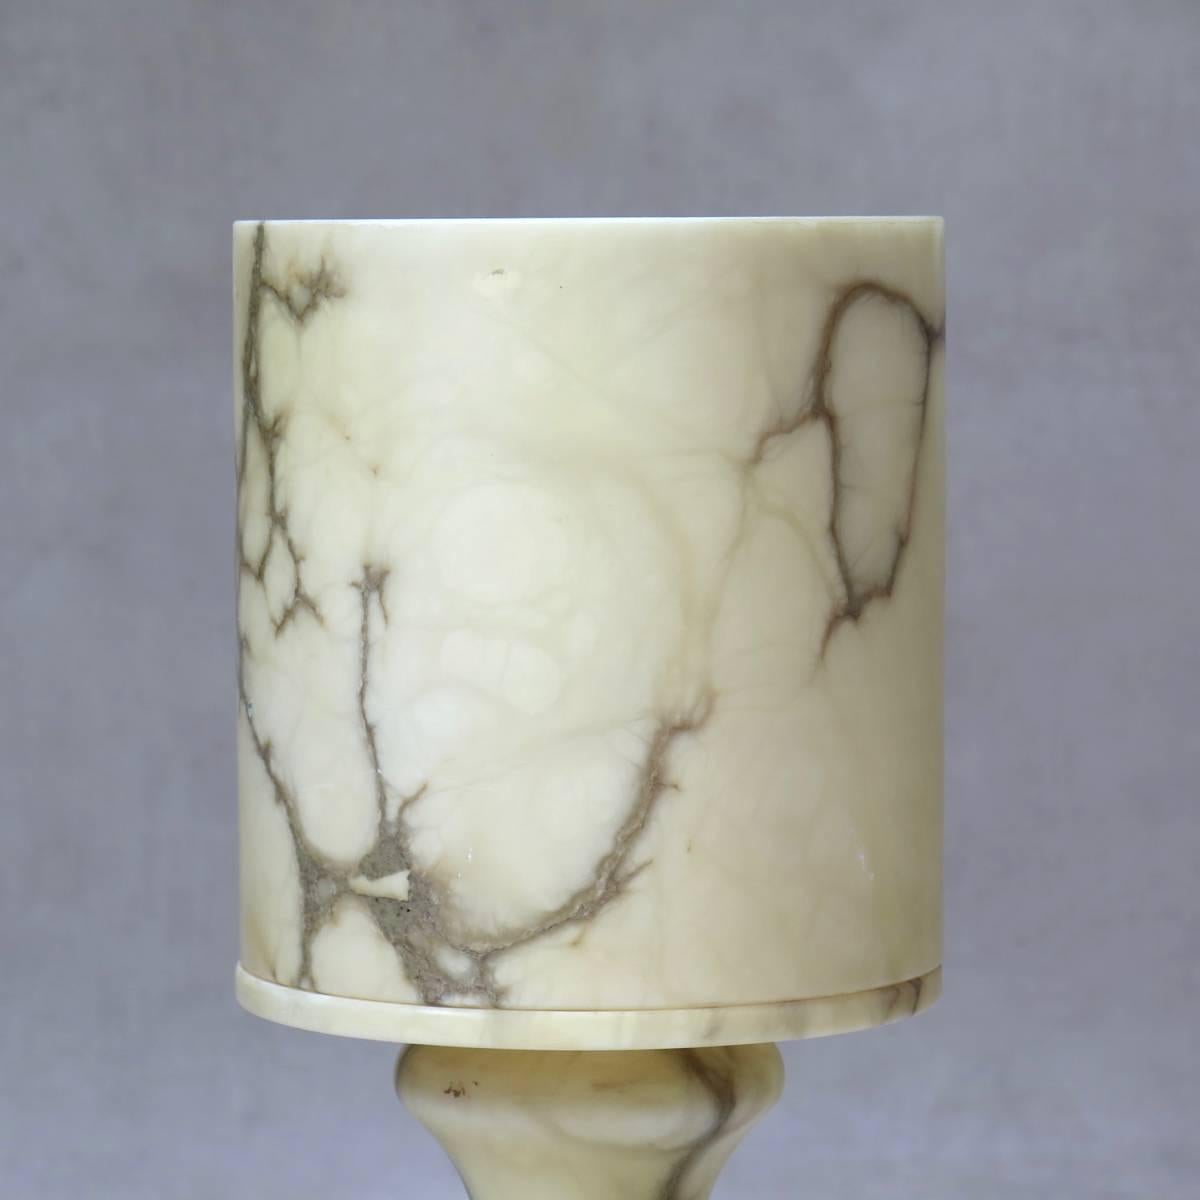 Large alabaster lamp, giving off a lovely warm light when lit.